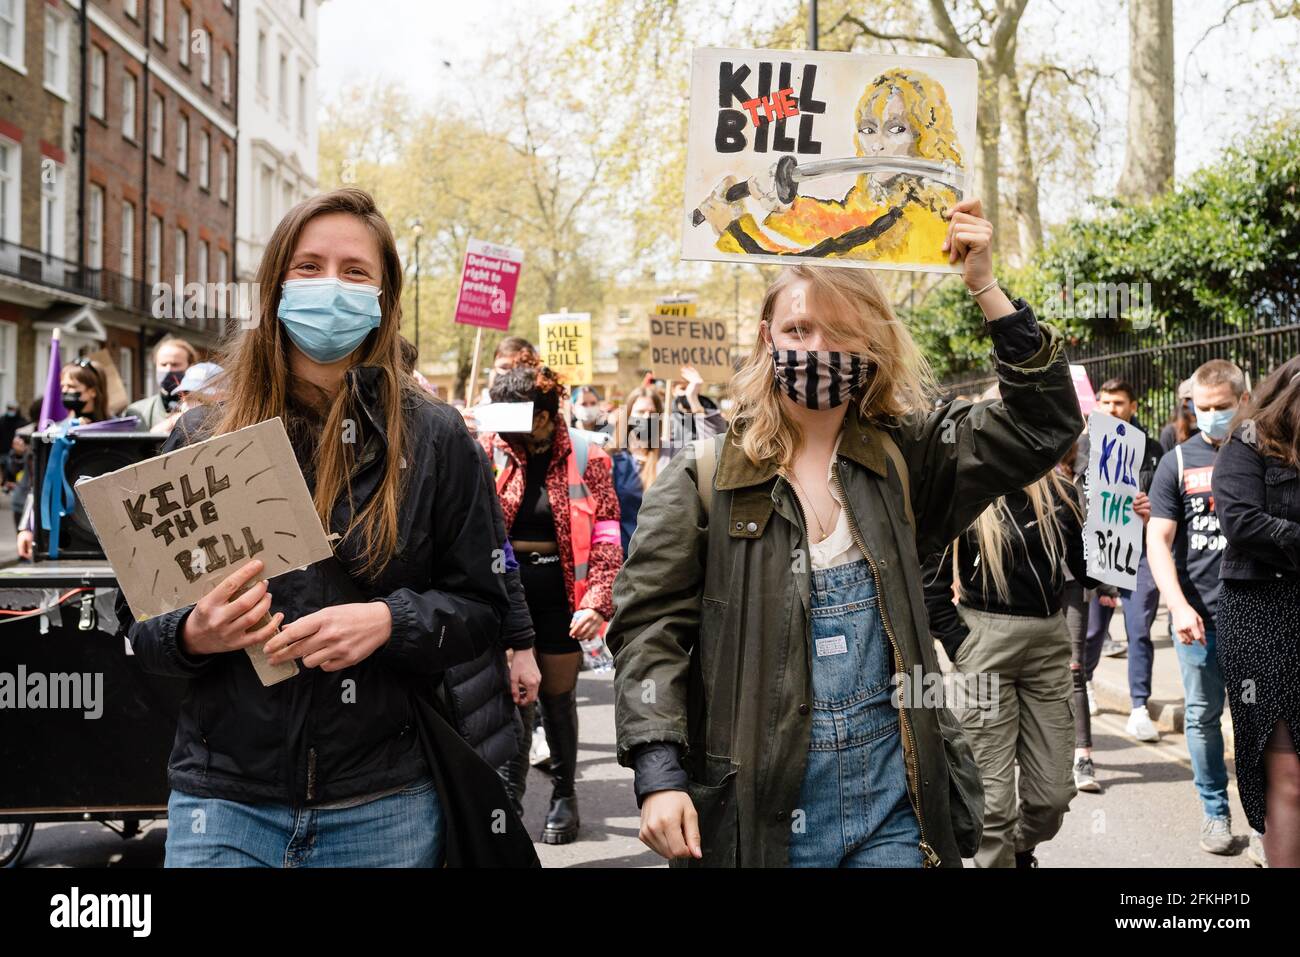 London, UK. 1 May 2021. Extinction Rebellion, Black Lives Matter, Antifa and Anarchists at 'Kill The Bill' protest against the new government's Bill Stock Photo